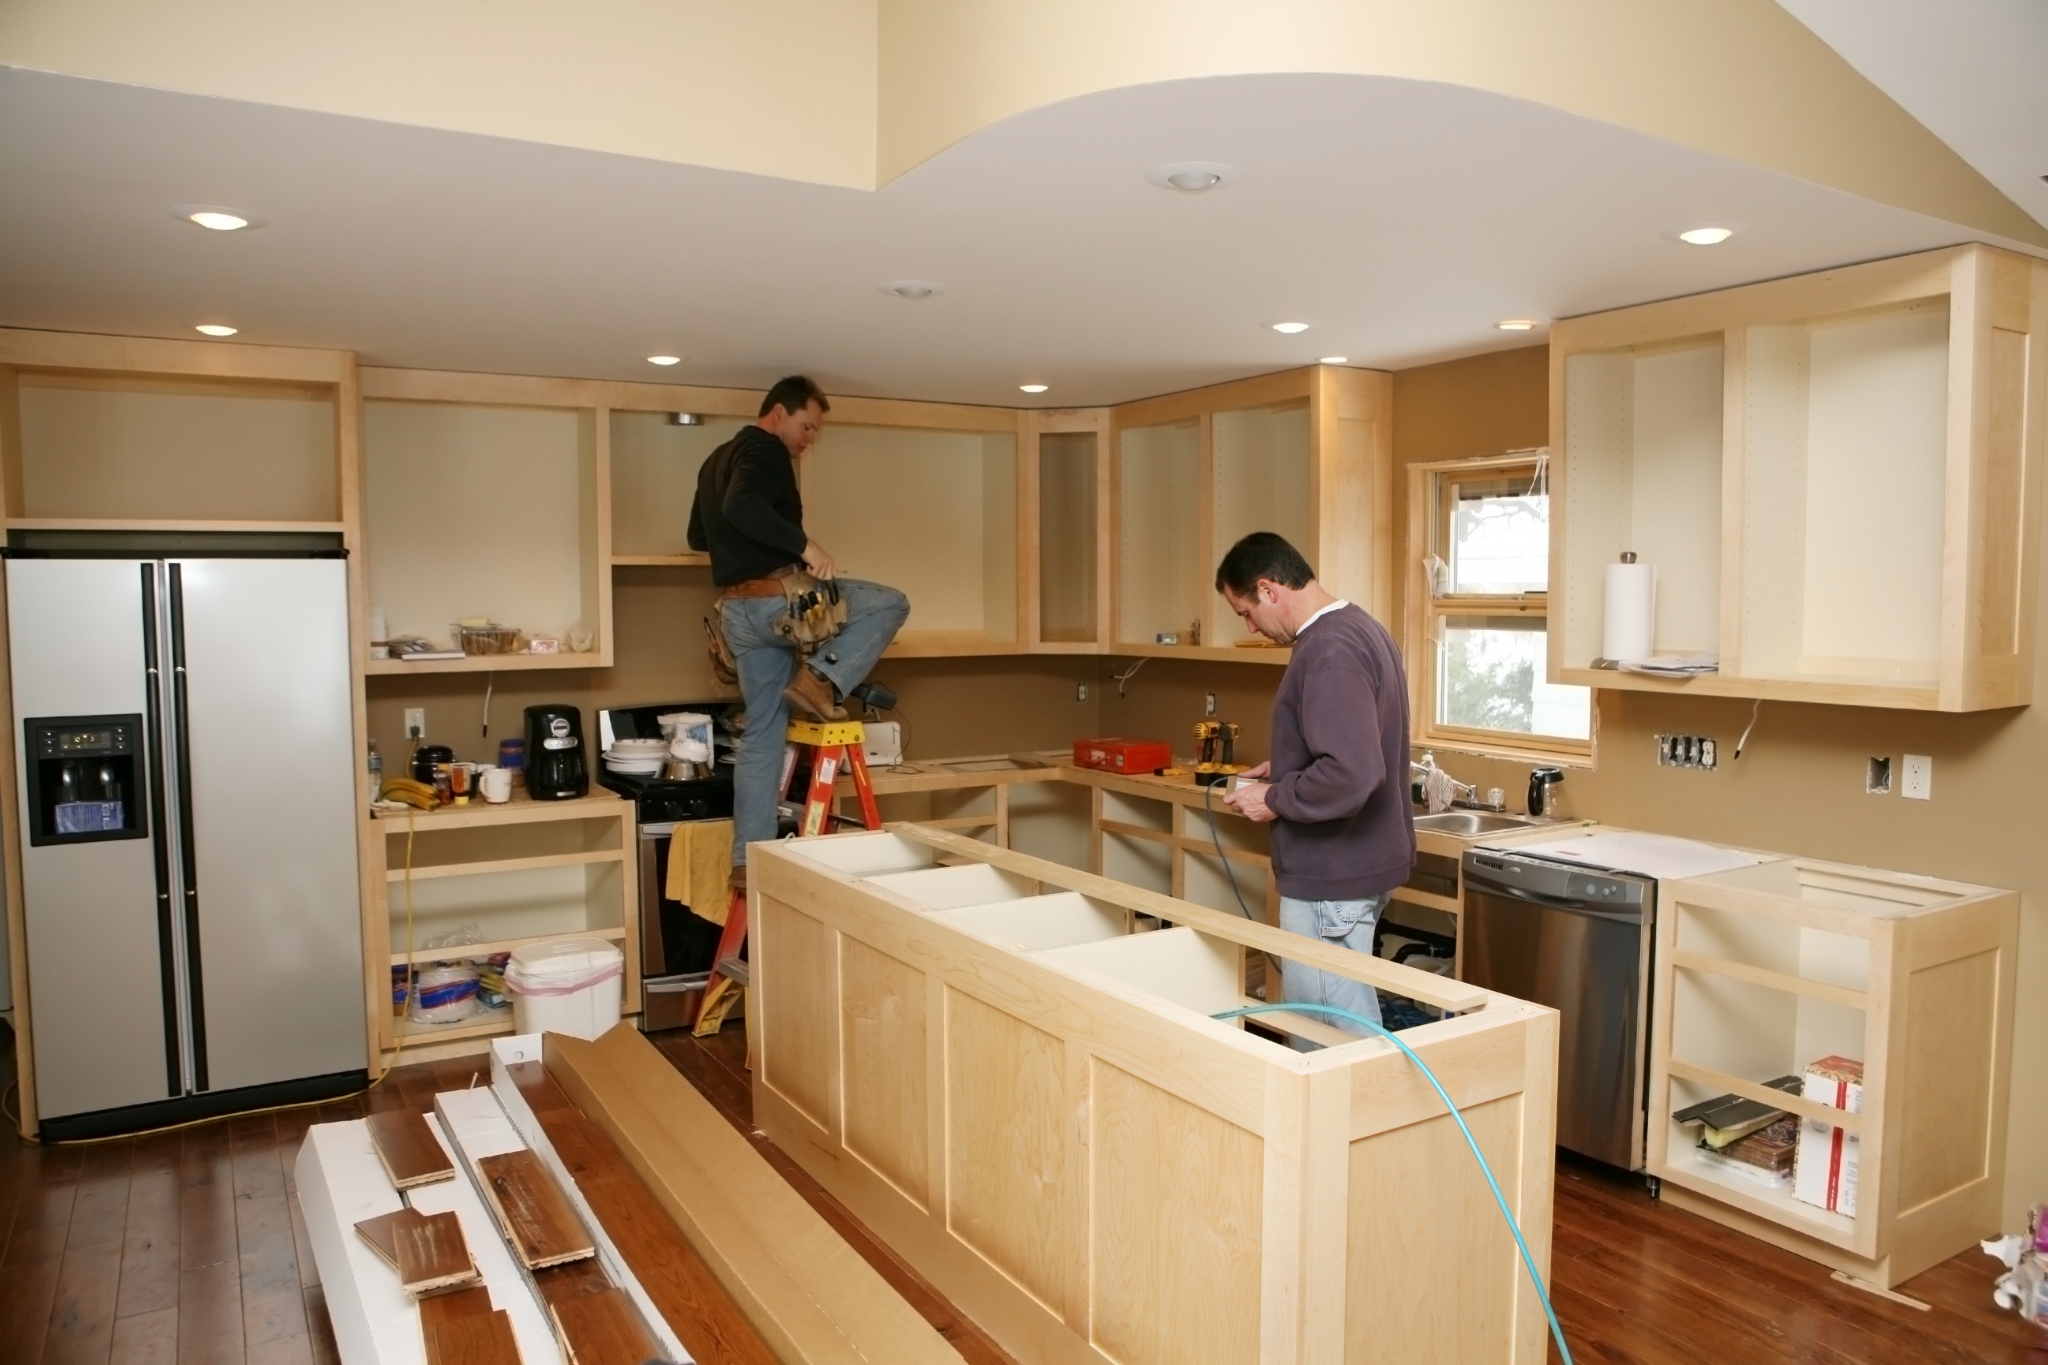 On average, Refacing Cabinet Service can cost between $4,000-$10,000